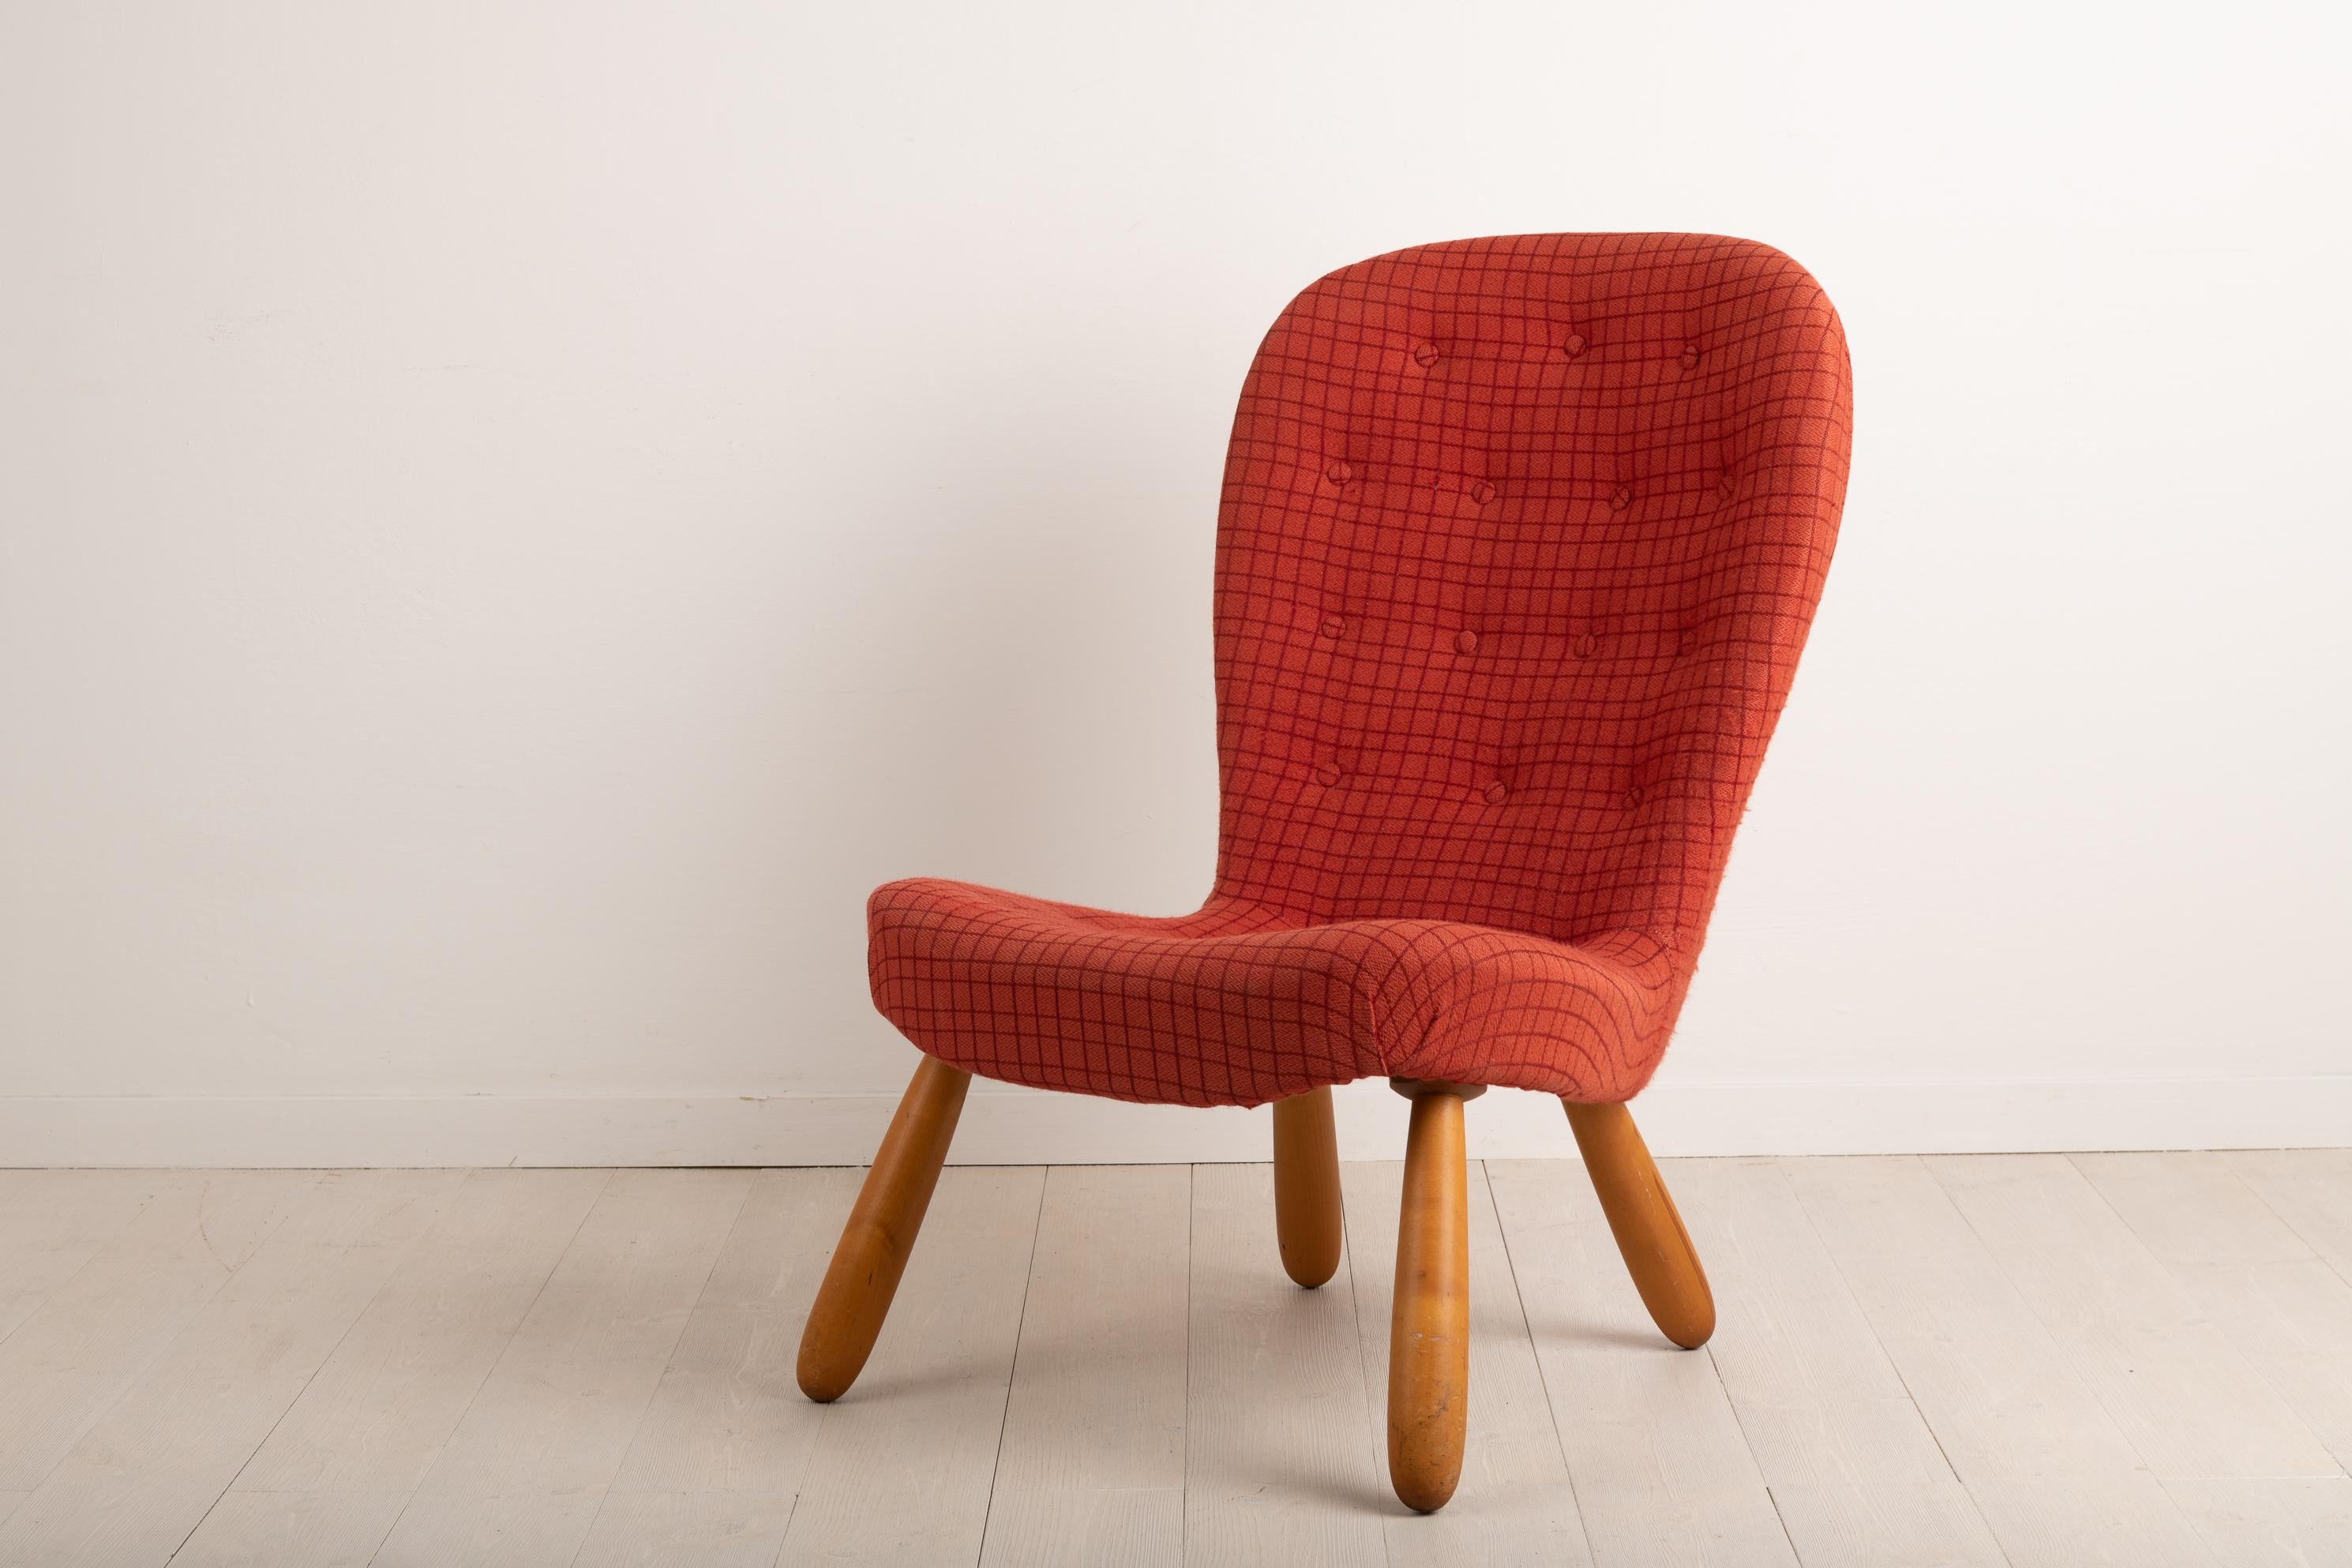 Clam chair or Muslinge armchair attributed to Philip Arctander. Designed and manufactured the mid-20th century the chair has a genuine retro feel. The bright coloured fabric and recognisable design ensures it's noticed in almost any room. Padded